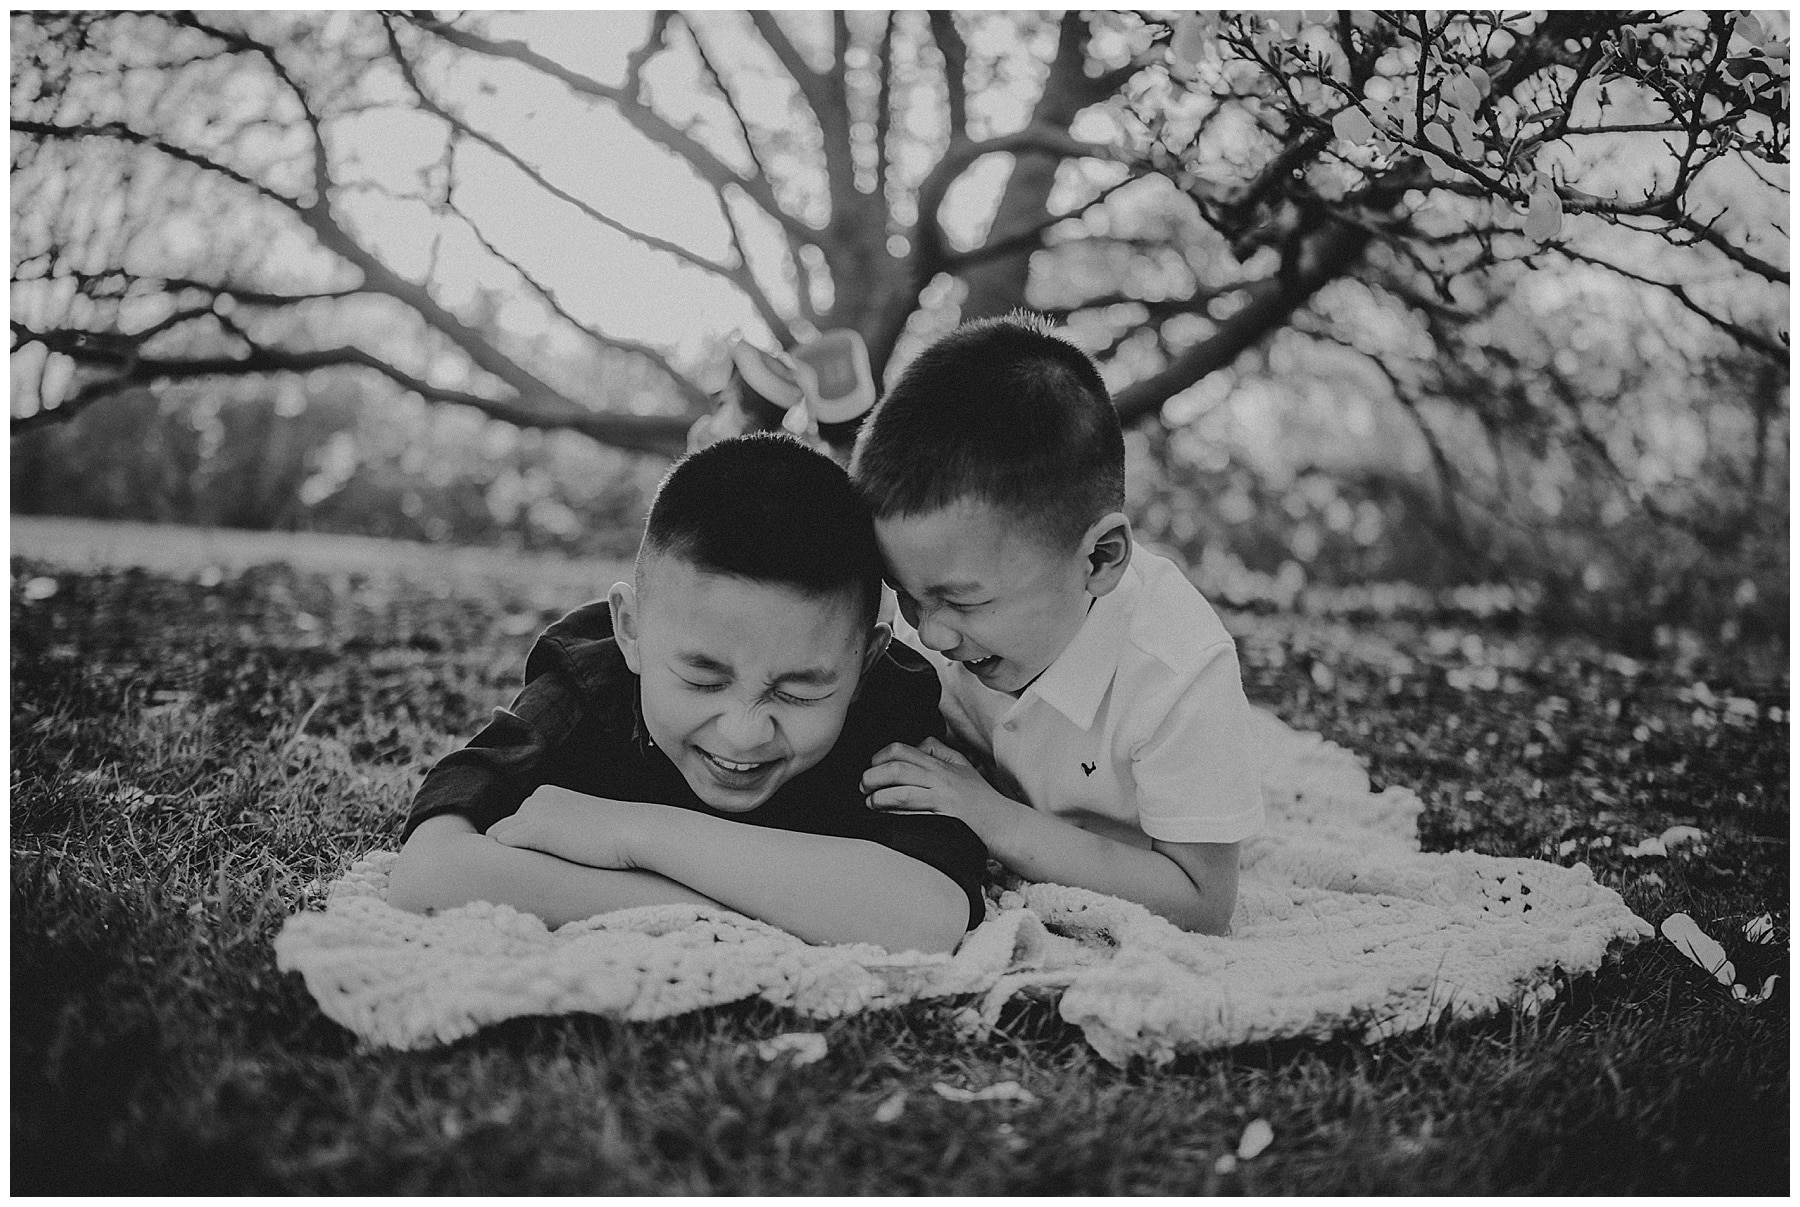 Brothers Laughing